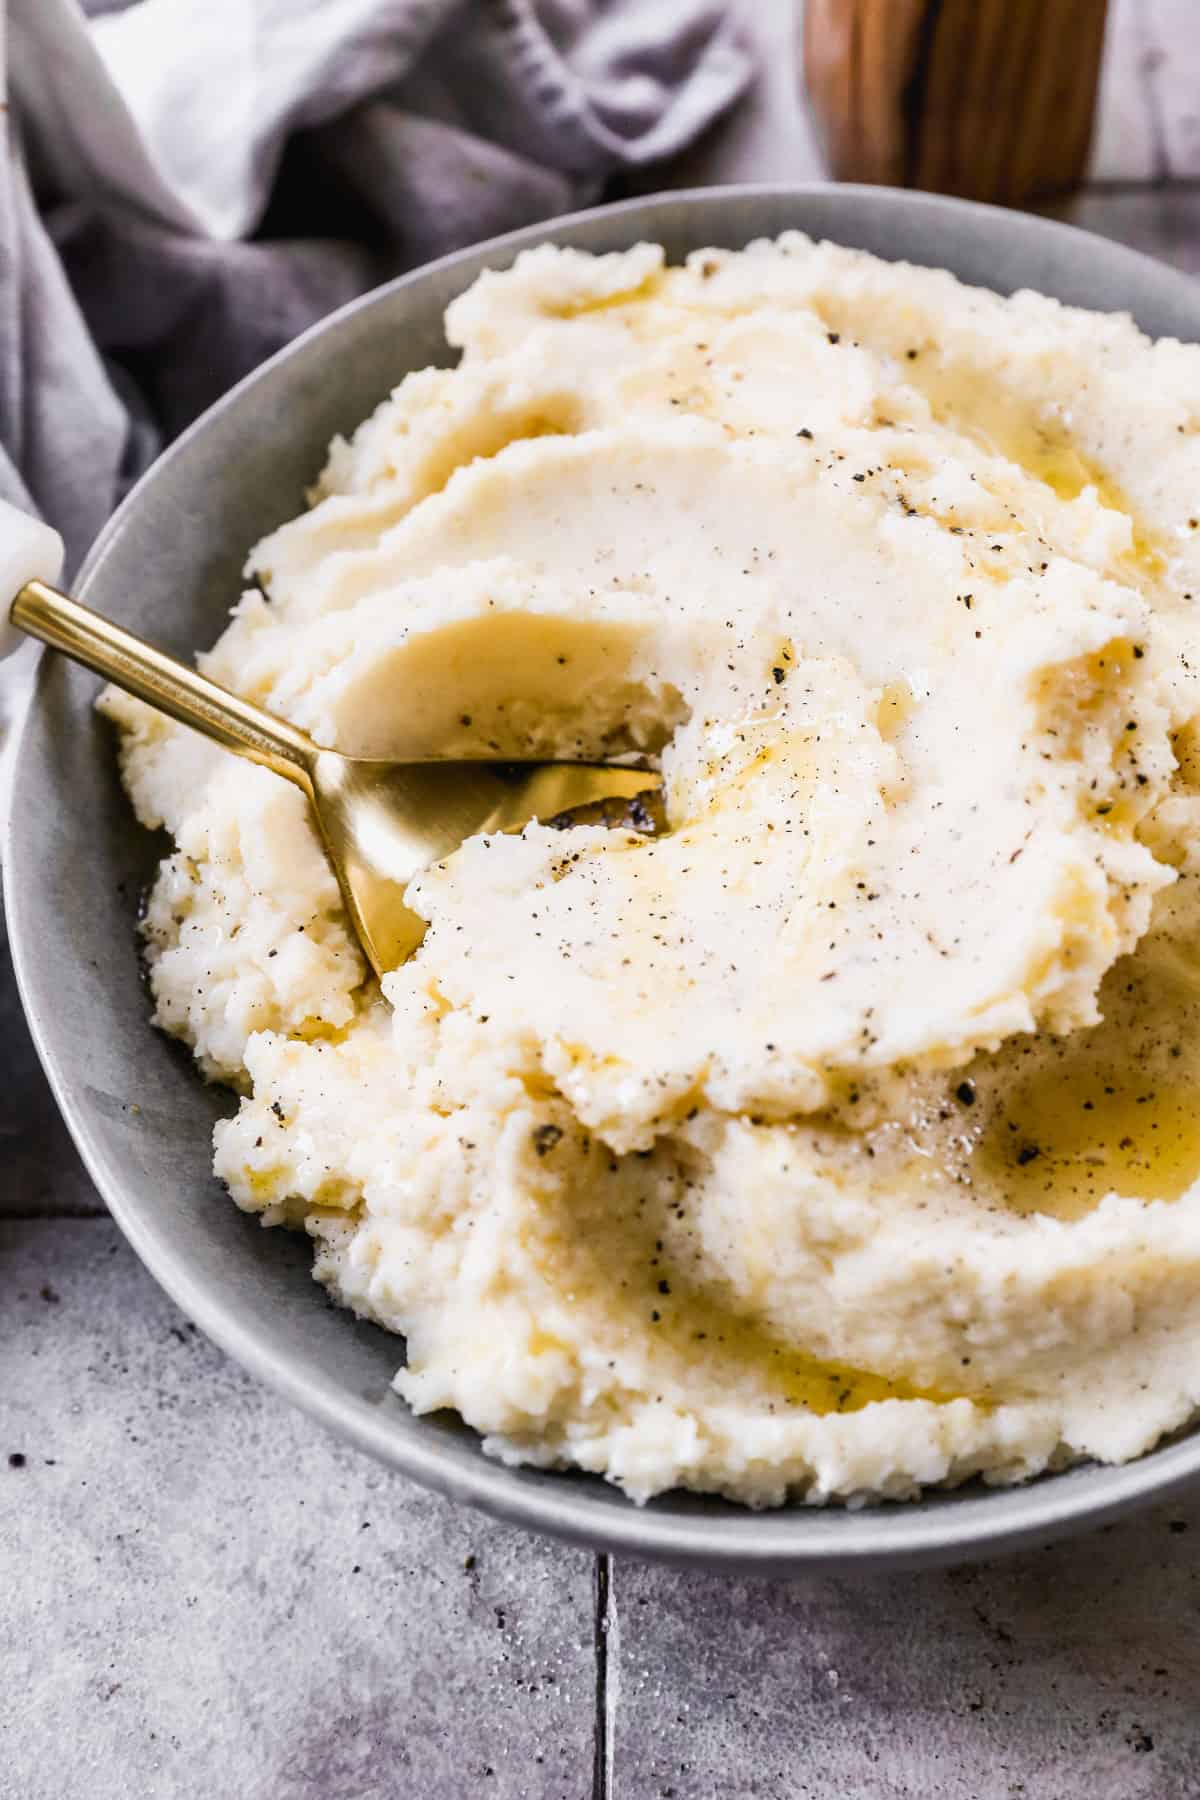 A bowl of creamy mashed potatoes with a spoon, ready to serve.